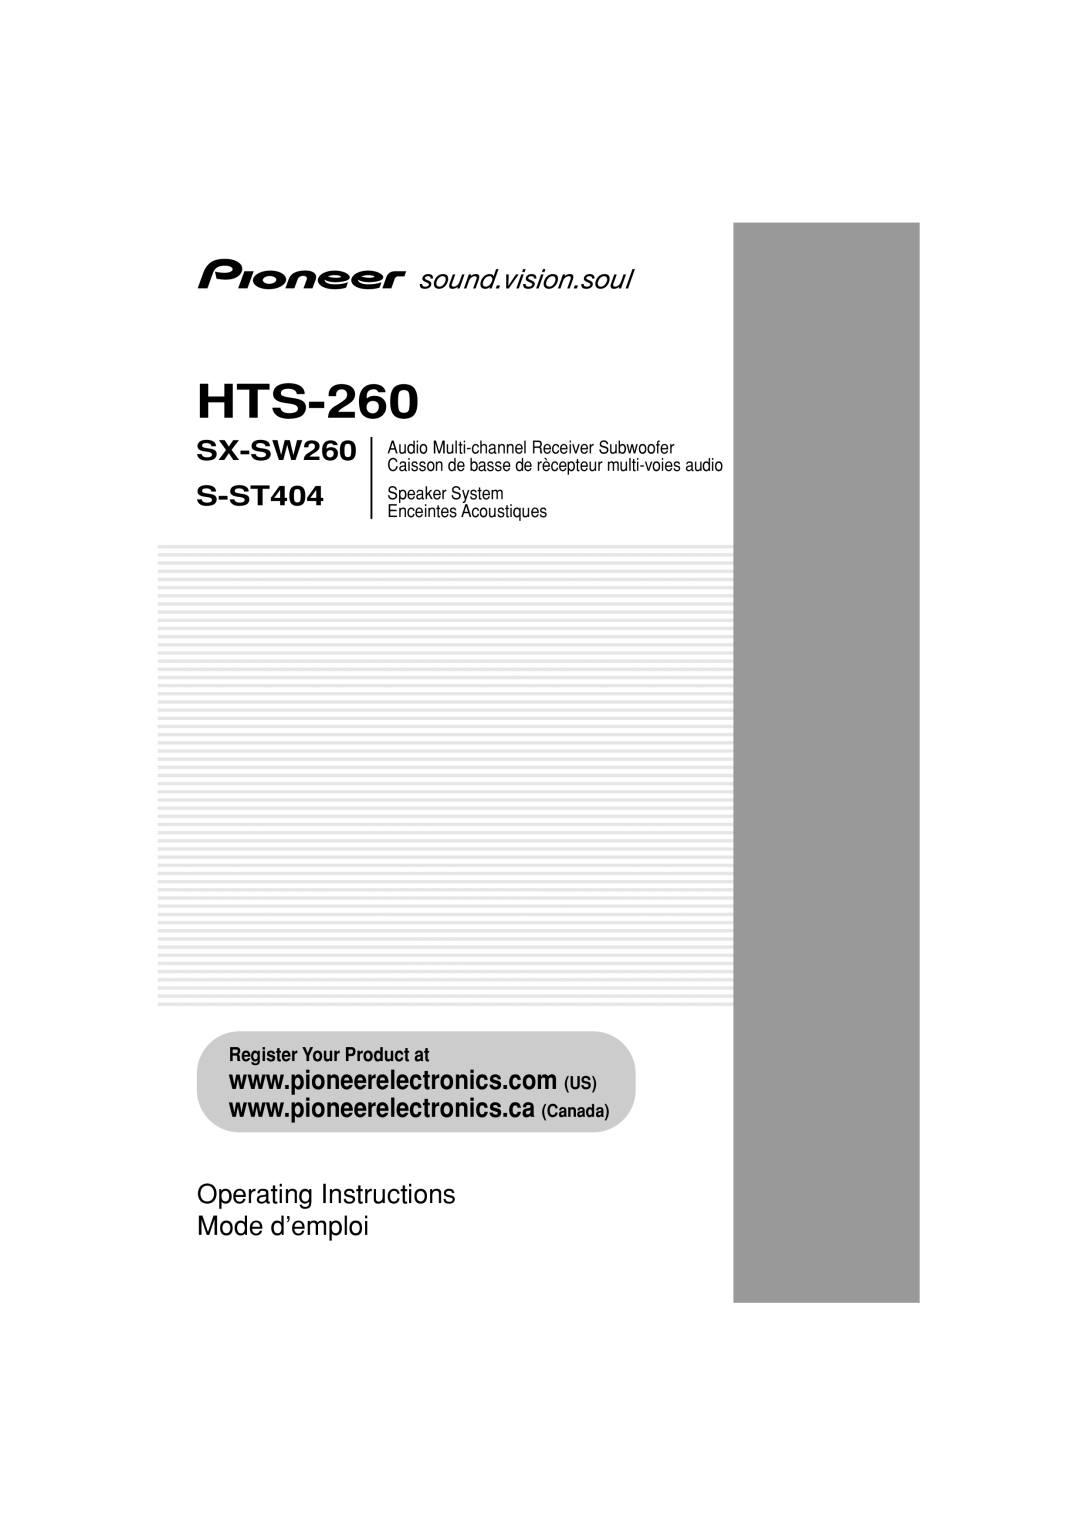 Pioneer operating instructions HTS-260, SX-SW260 S-ST404, Operating Instructions Mode d’emploi 